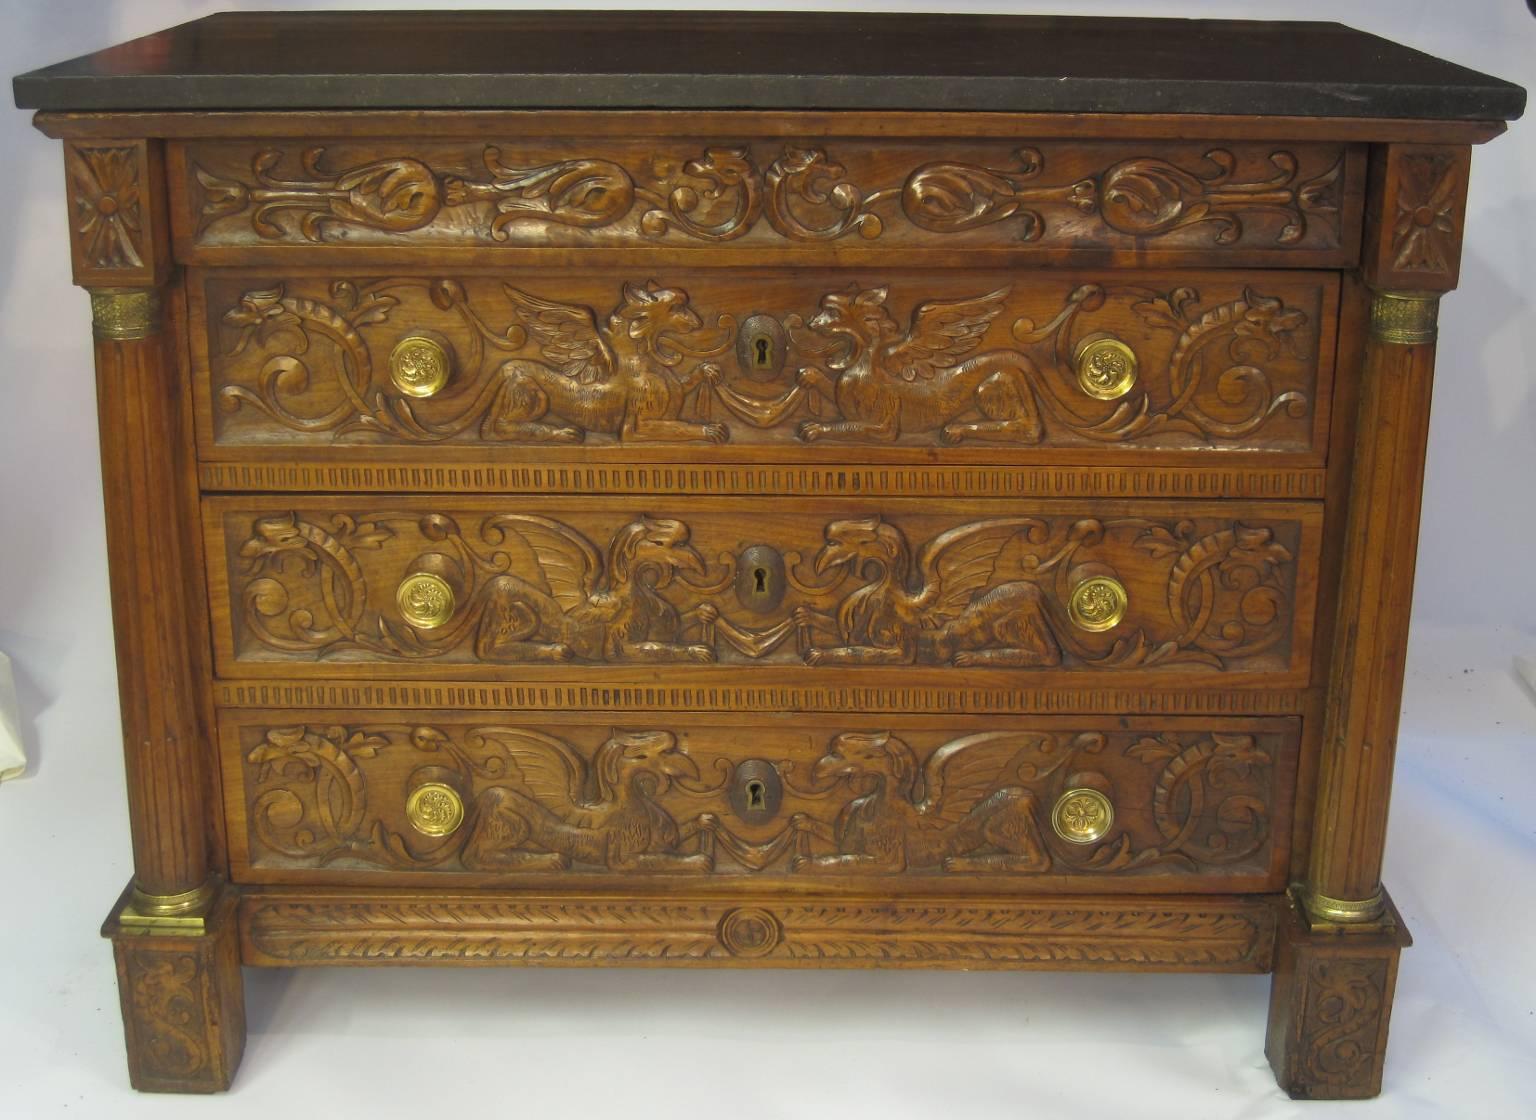 An Empire chest circa 1815 comprising three long drawers and one concealed drawer. All drawers are intricately carved with griffins, foliage and other mythological figures. Flanking the drawers are fluted tapered columns terminating in decorative